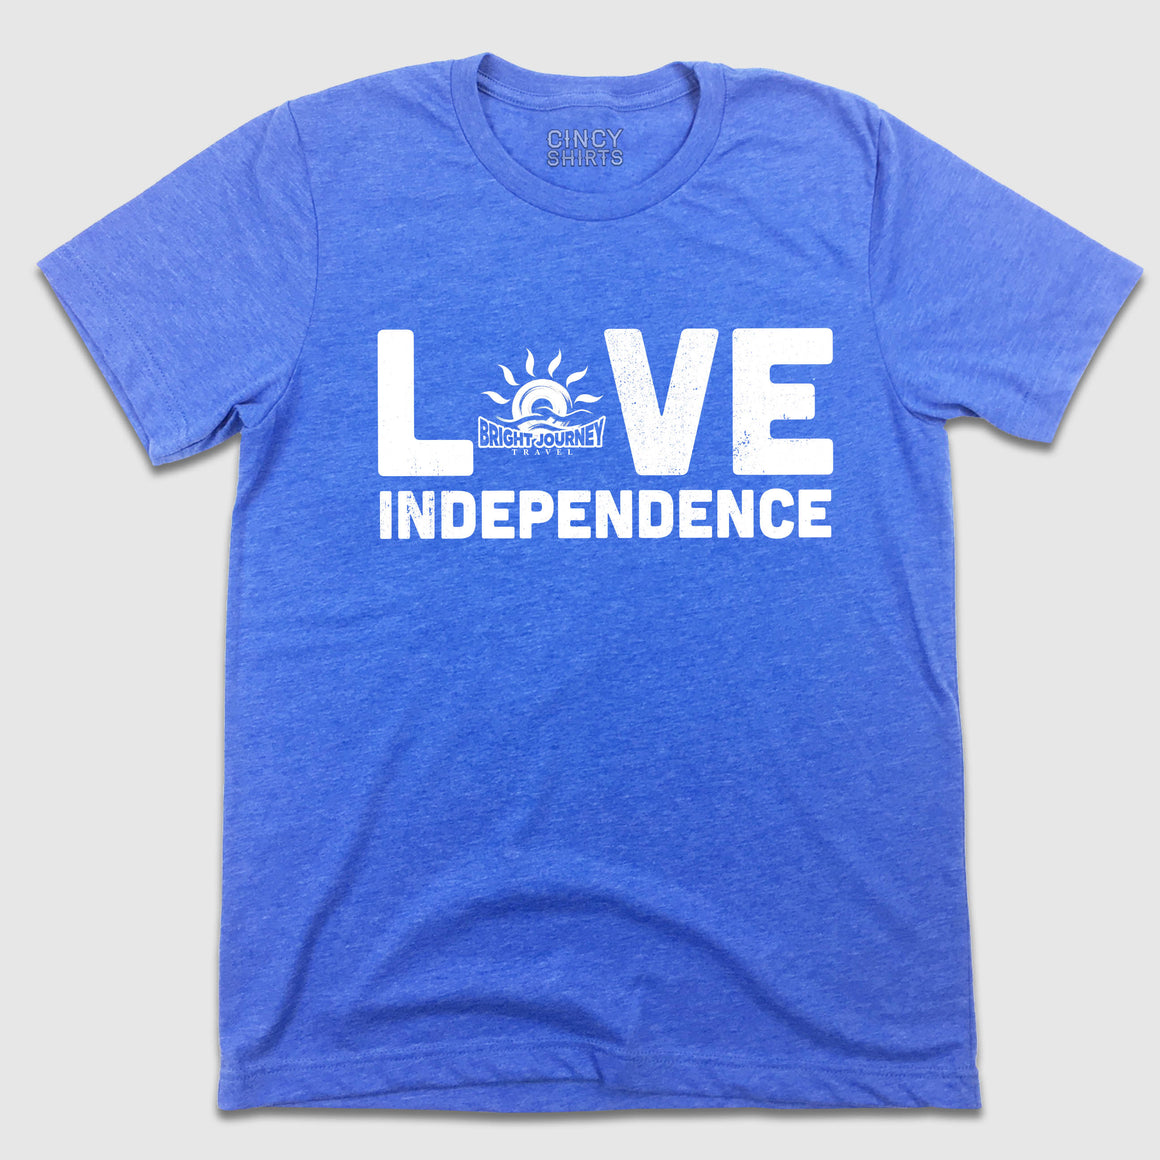 Love Independence - Bright Journey - Cincy Shirts